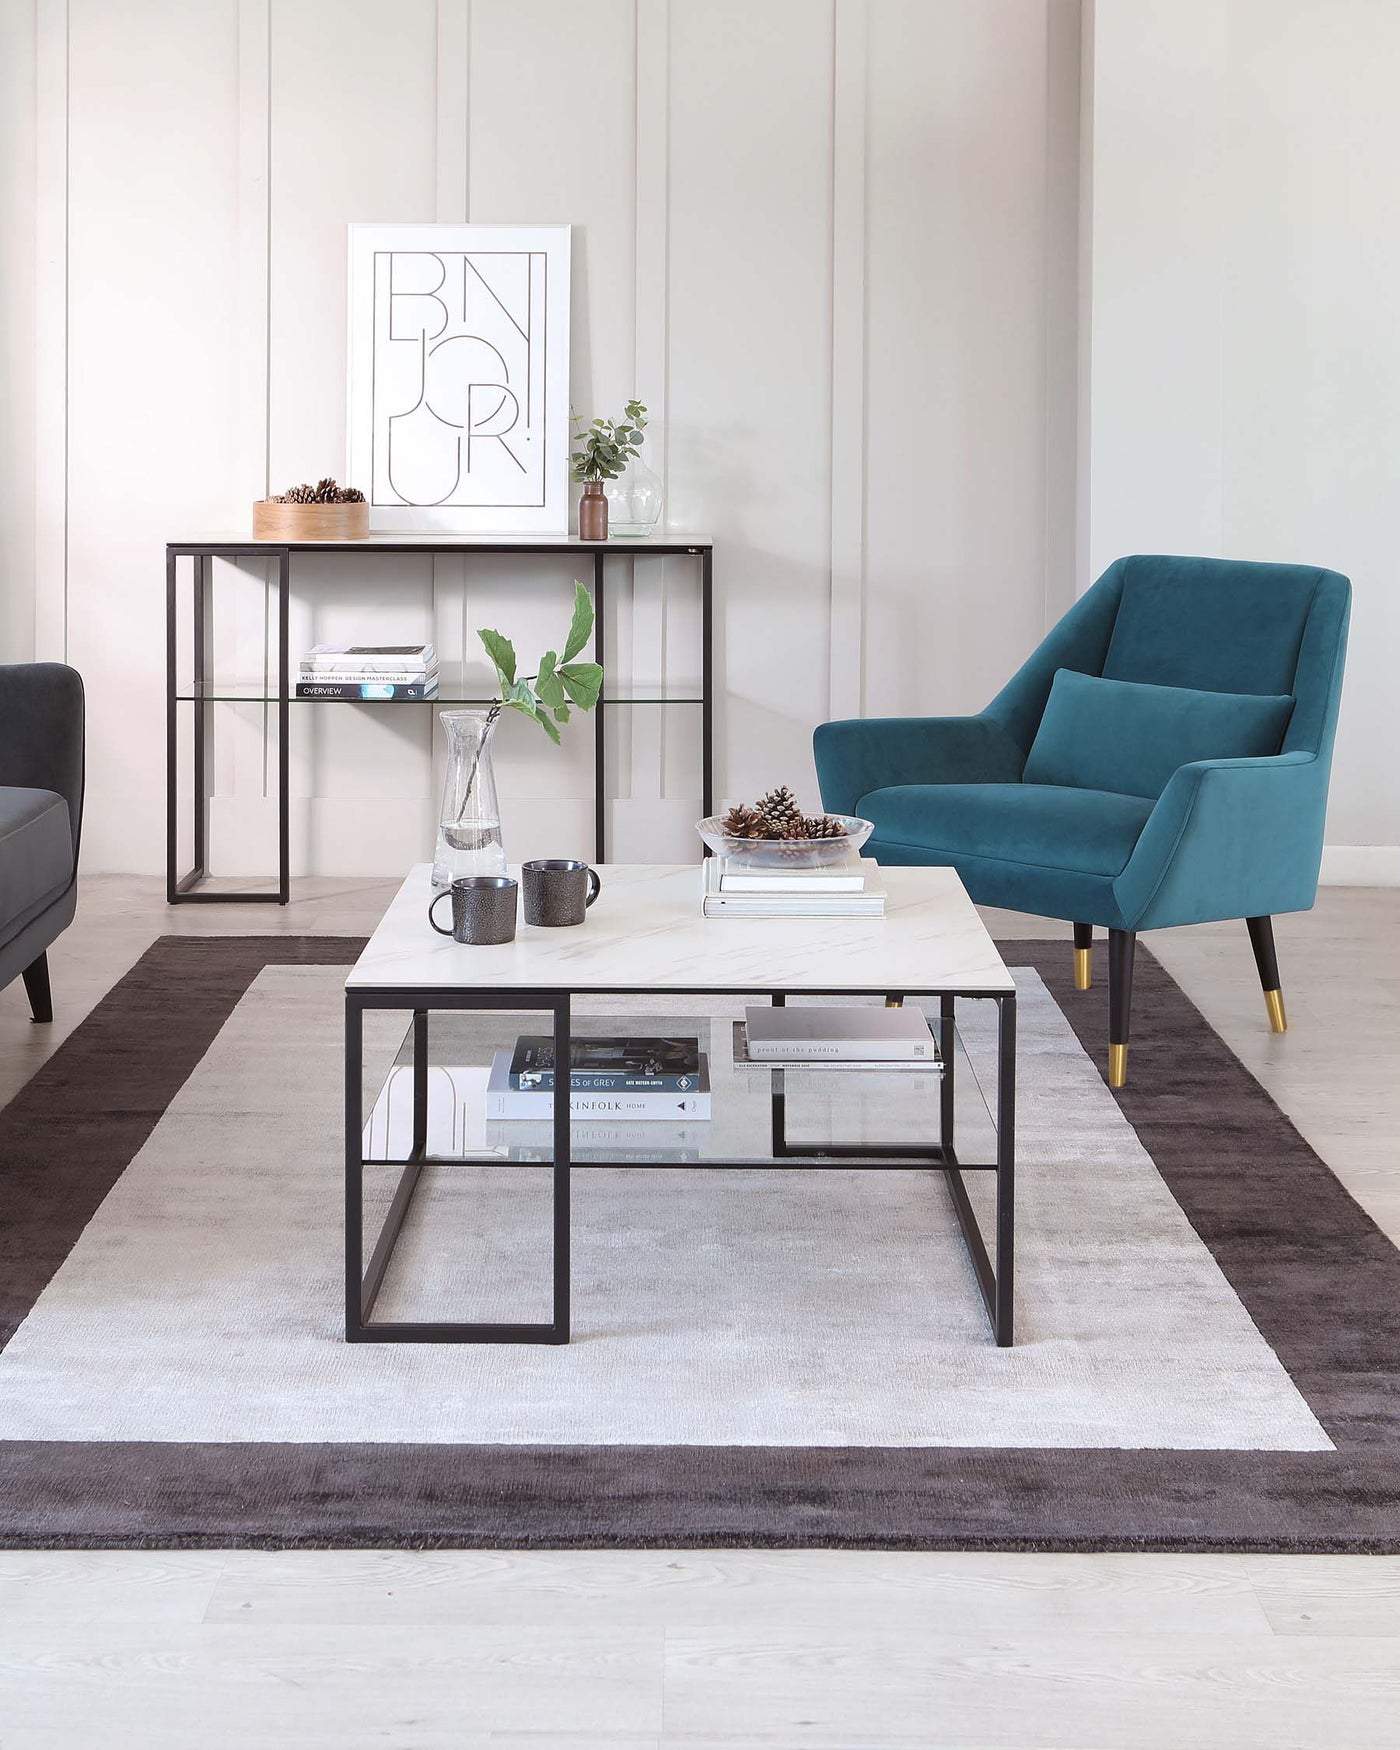 Modern furniture set in a minimalist living room including a teal blue armchair with tapered legs and soft fabric upholstery, a sleek rectangular coffee table with a white top and black metal frame, and a slim console table with a matching black metal frame and wooden top. The room features neutral tones, with the furniture placed on a gradient grey area rug. Decorations include framed wall art, a carafe and glasses on the coffee table, and plant accents on the console table.